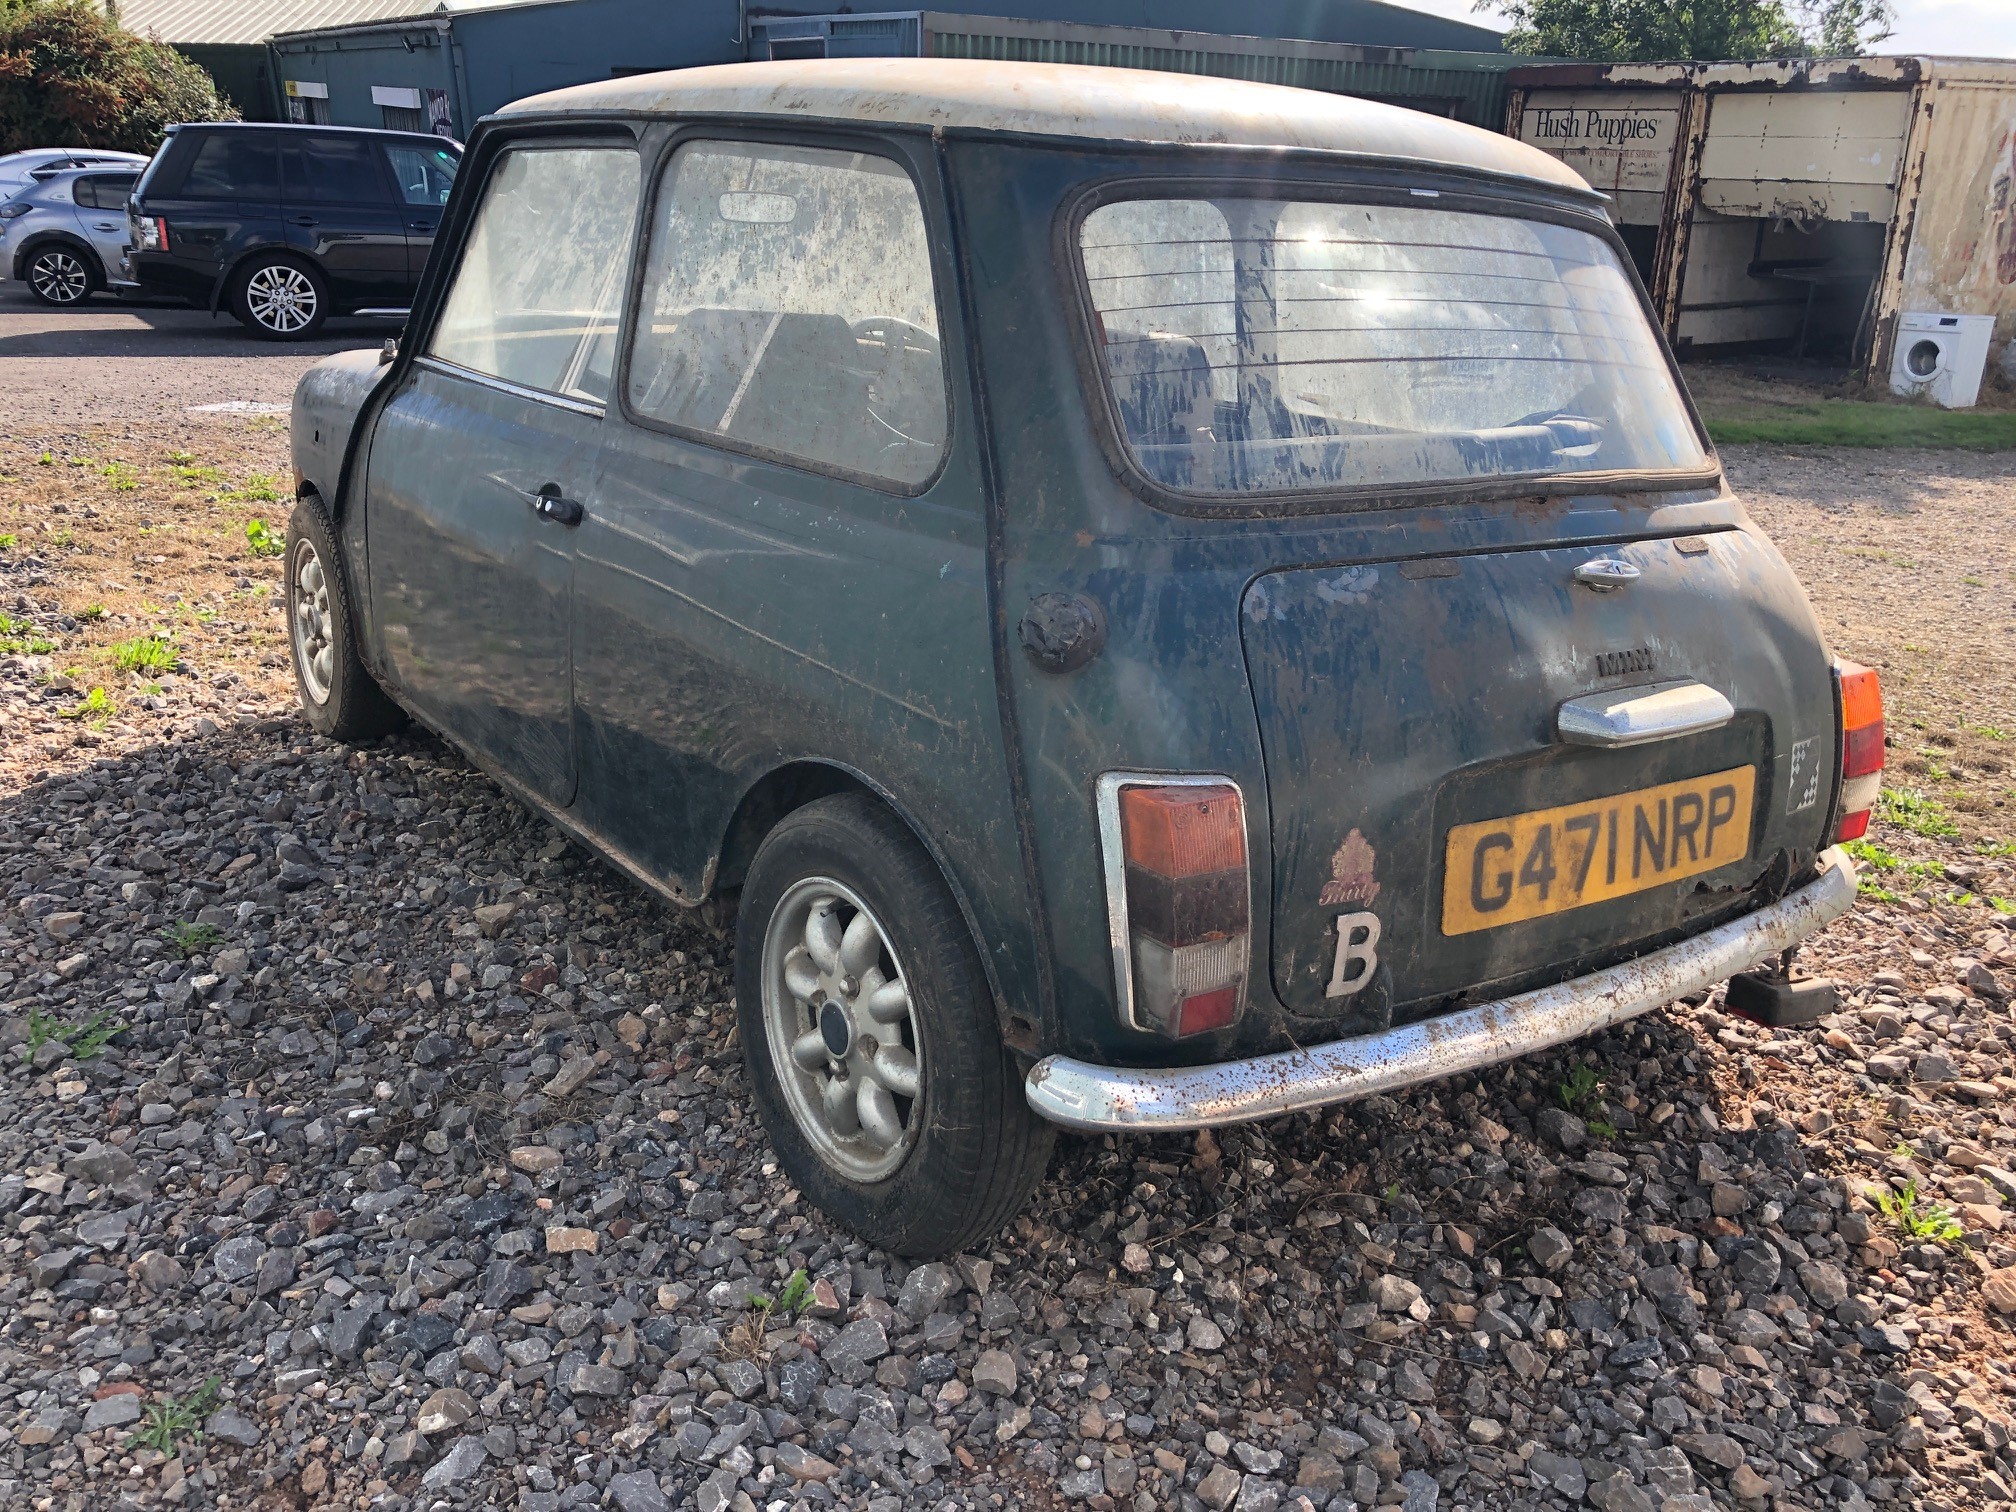 1990 Mini Racing Green Checkmate Registration number G471 NRP Being sold without reserve Rare 30 - Image 6 of 7